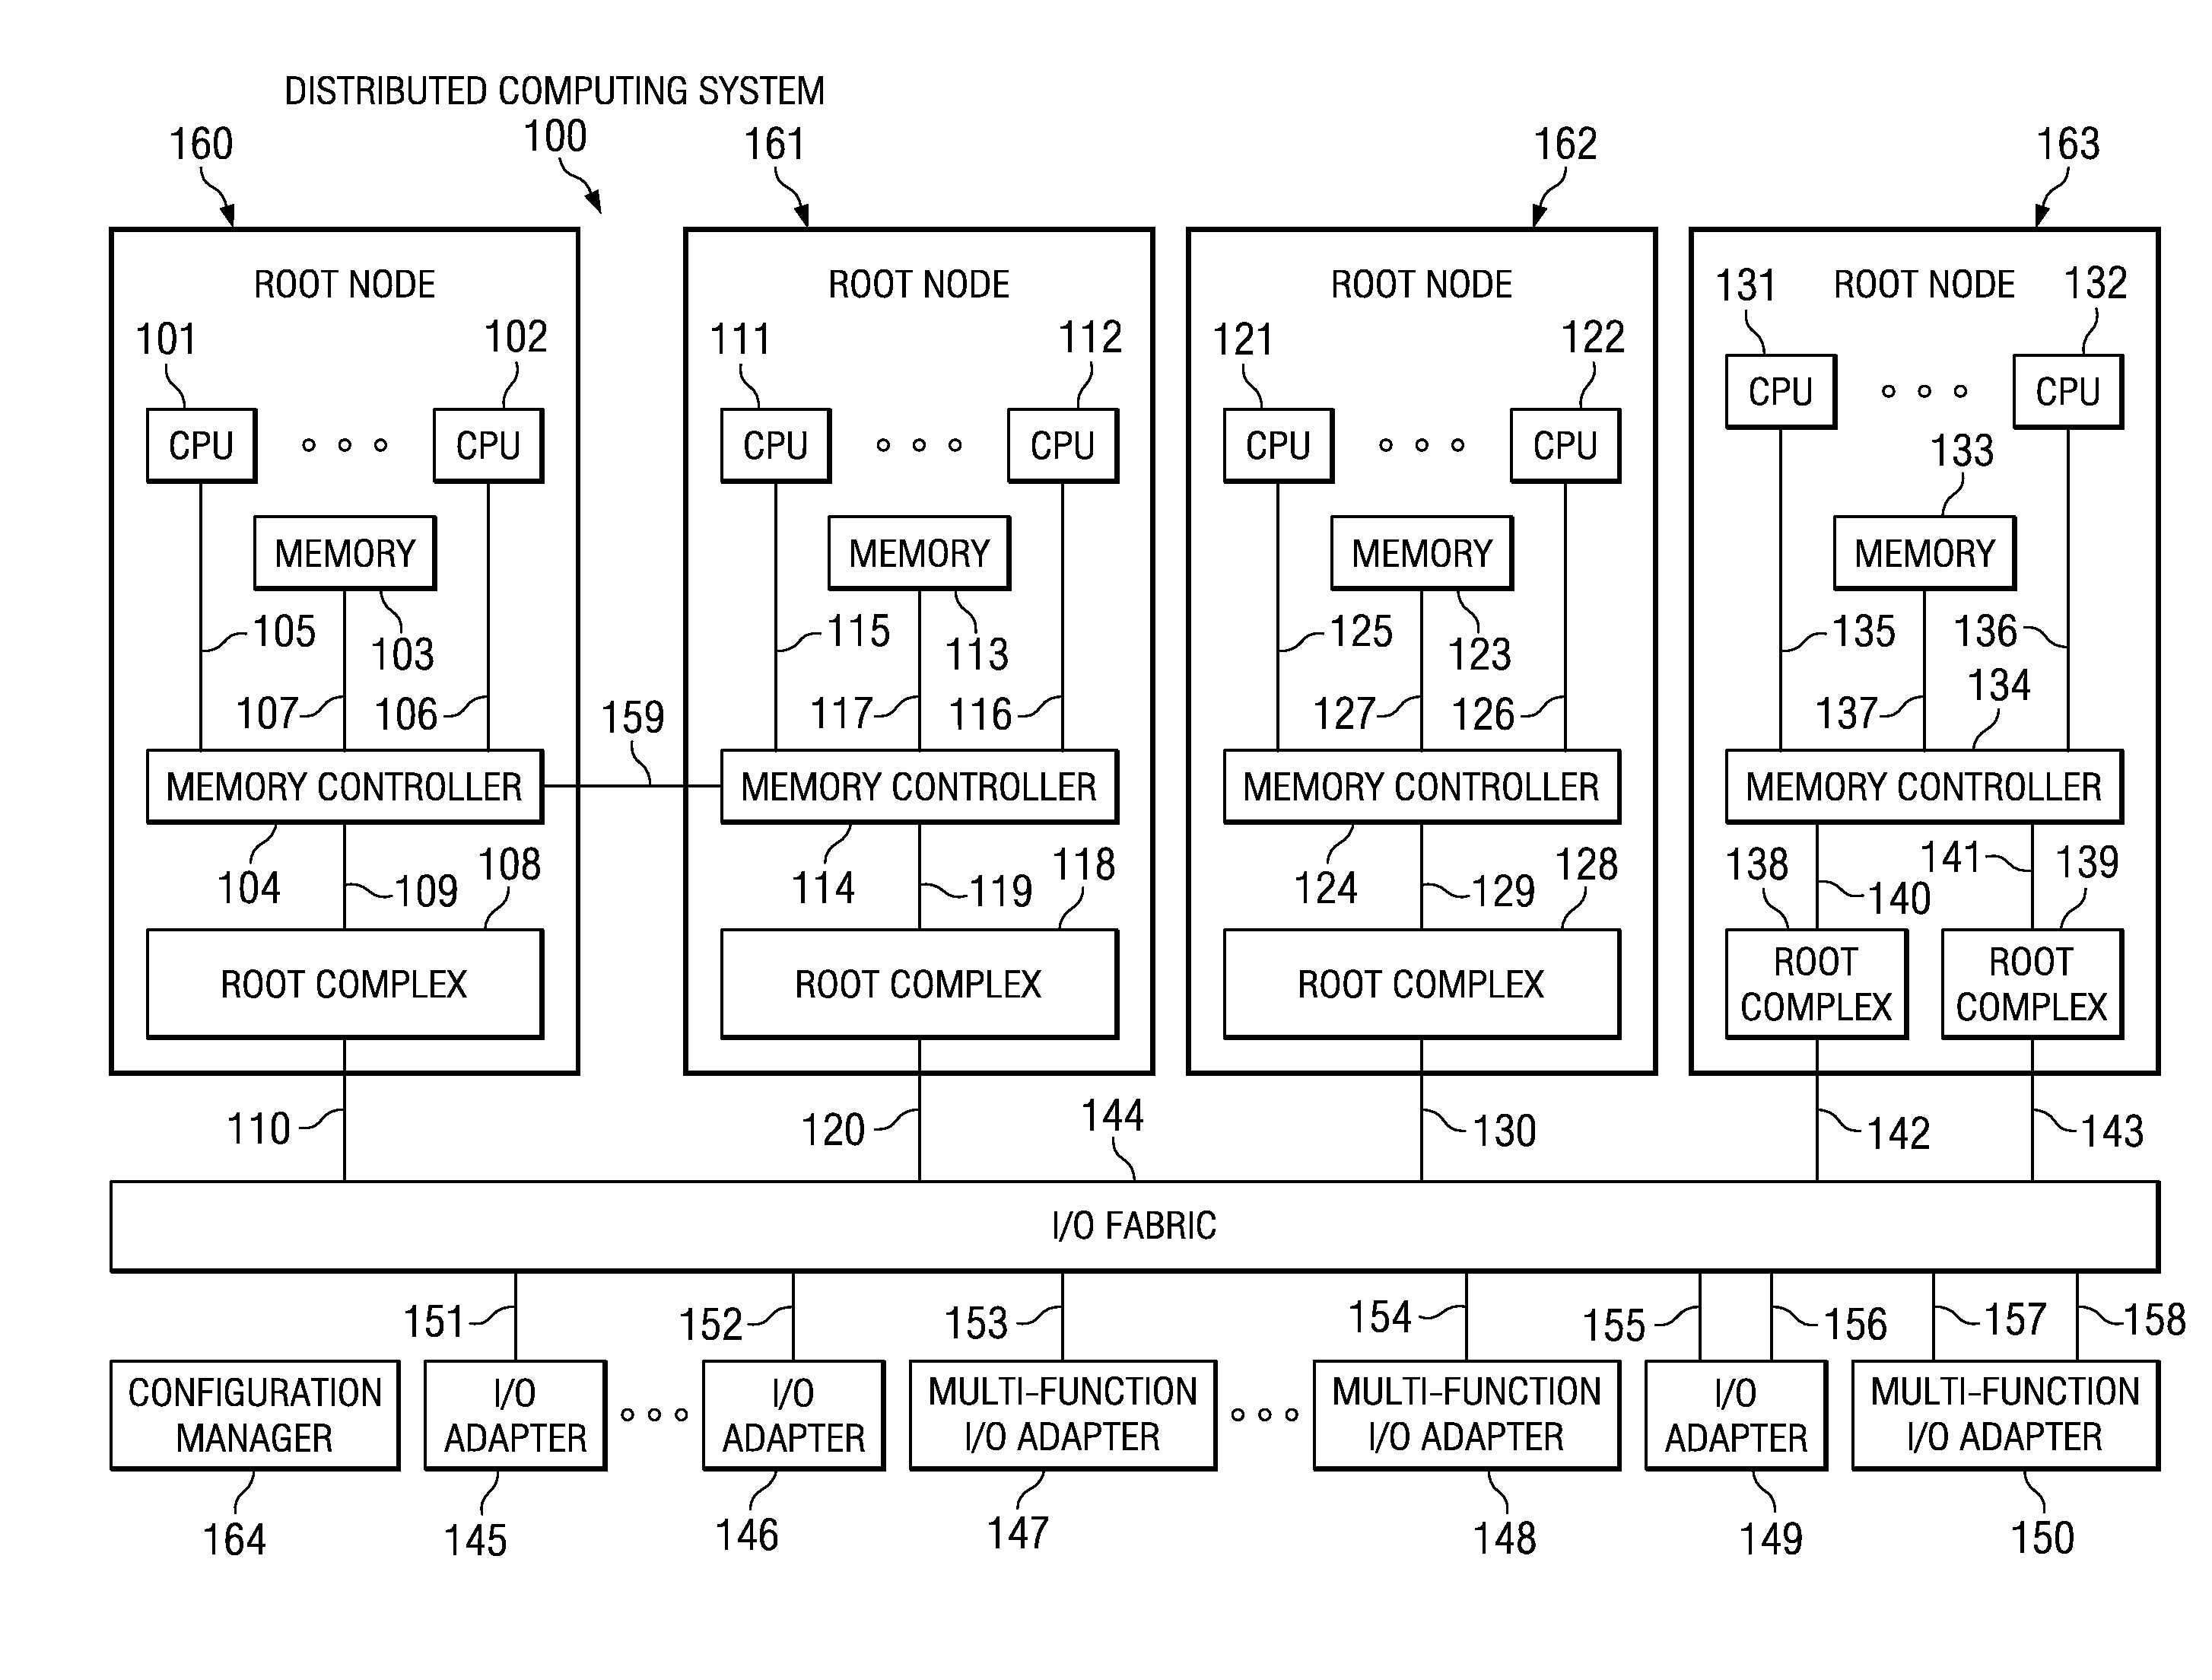 Bus/device/function translation within and routing of communications packets in a PCI switched-fabric in a multi-host environment environment utilizing a root switch